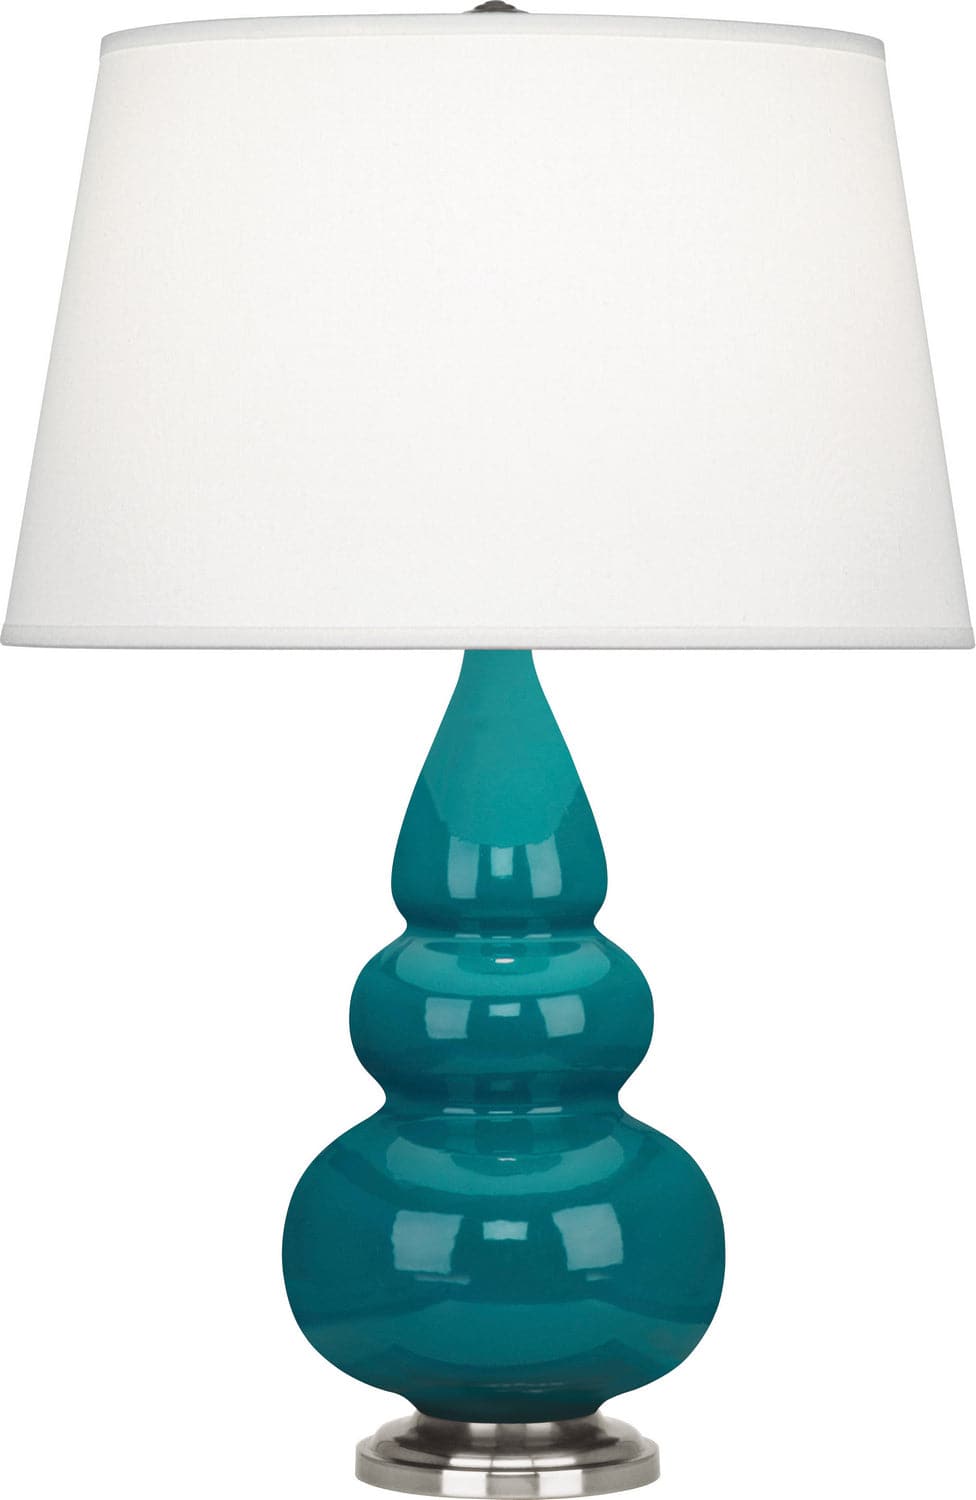 Robert Abbey - 293X - One Light Accent Lamp - Small Triple Gourd - Peacock Glazed w/Antique Silver